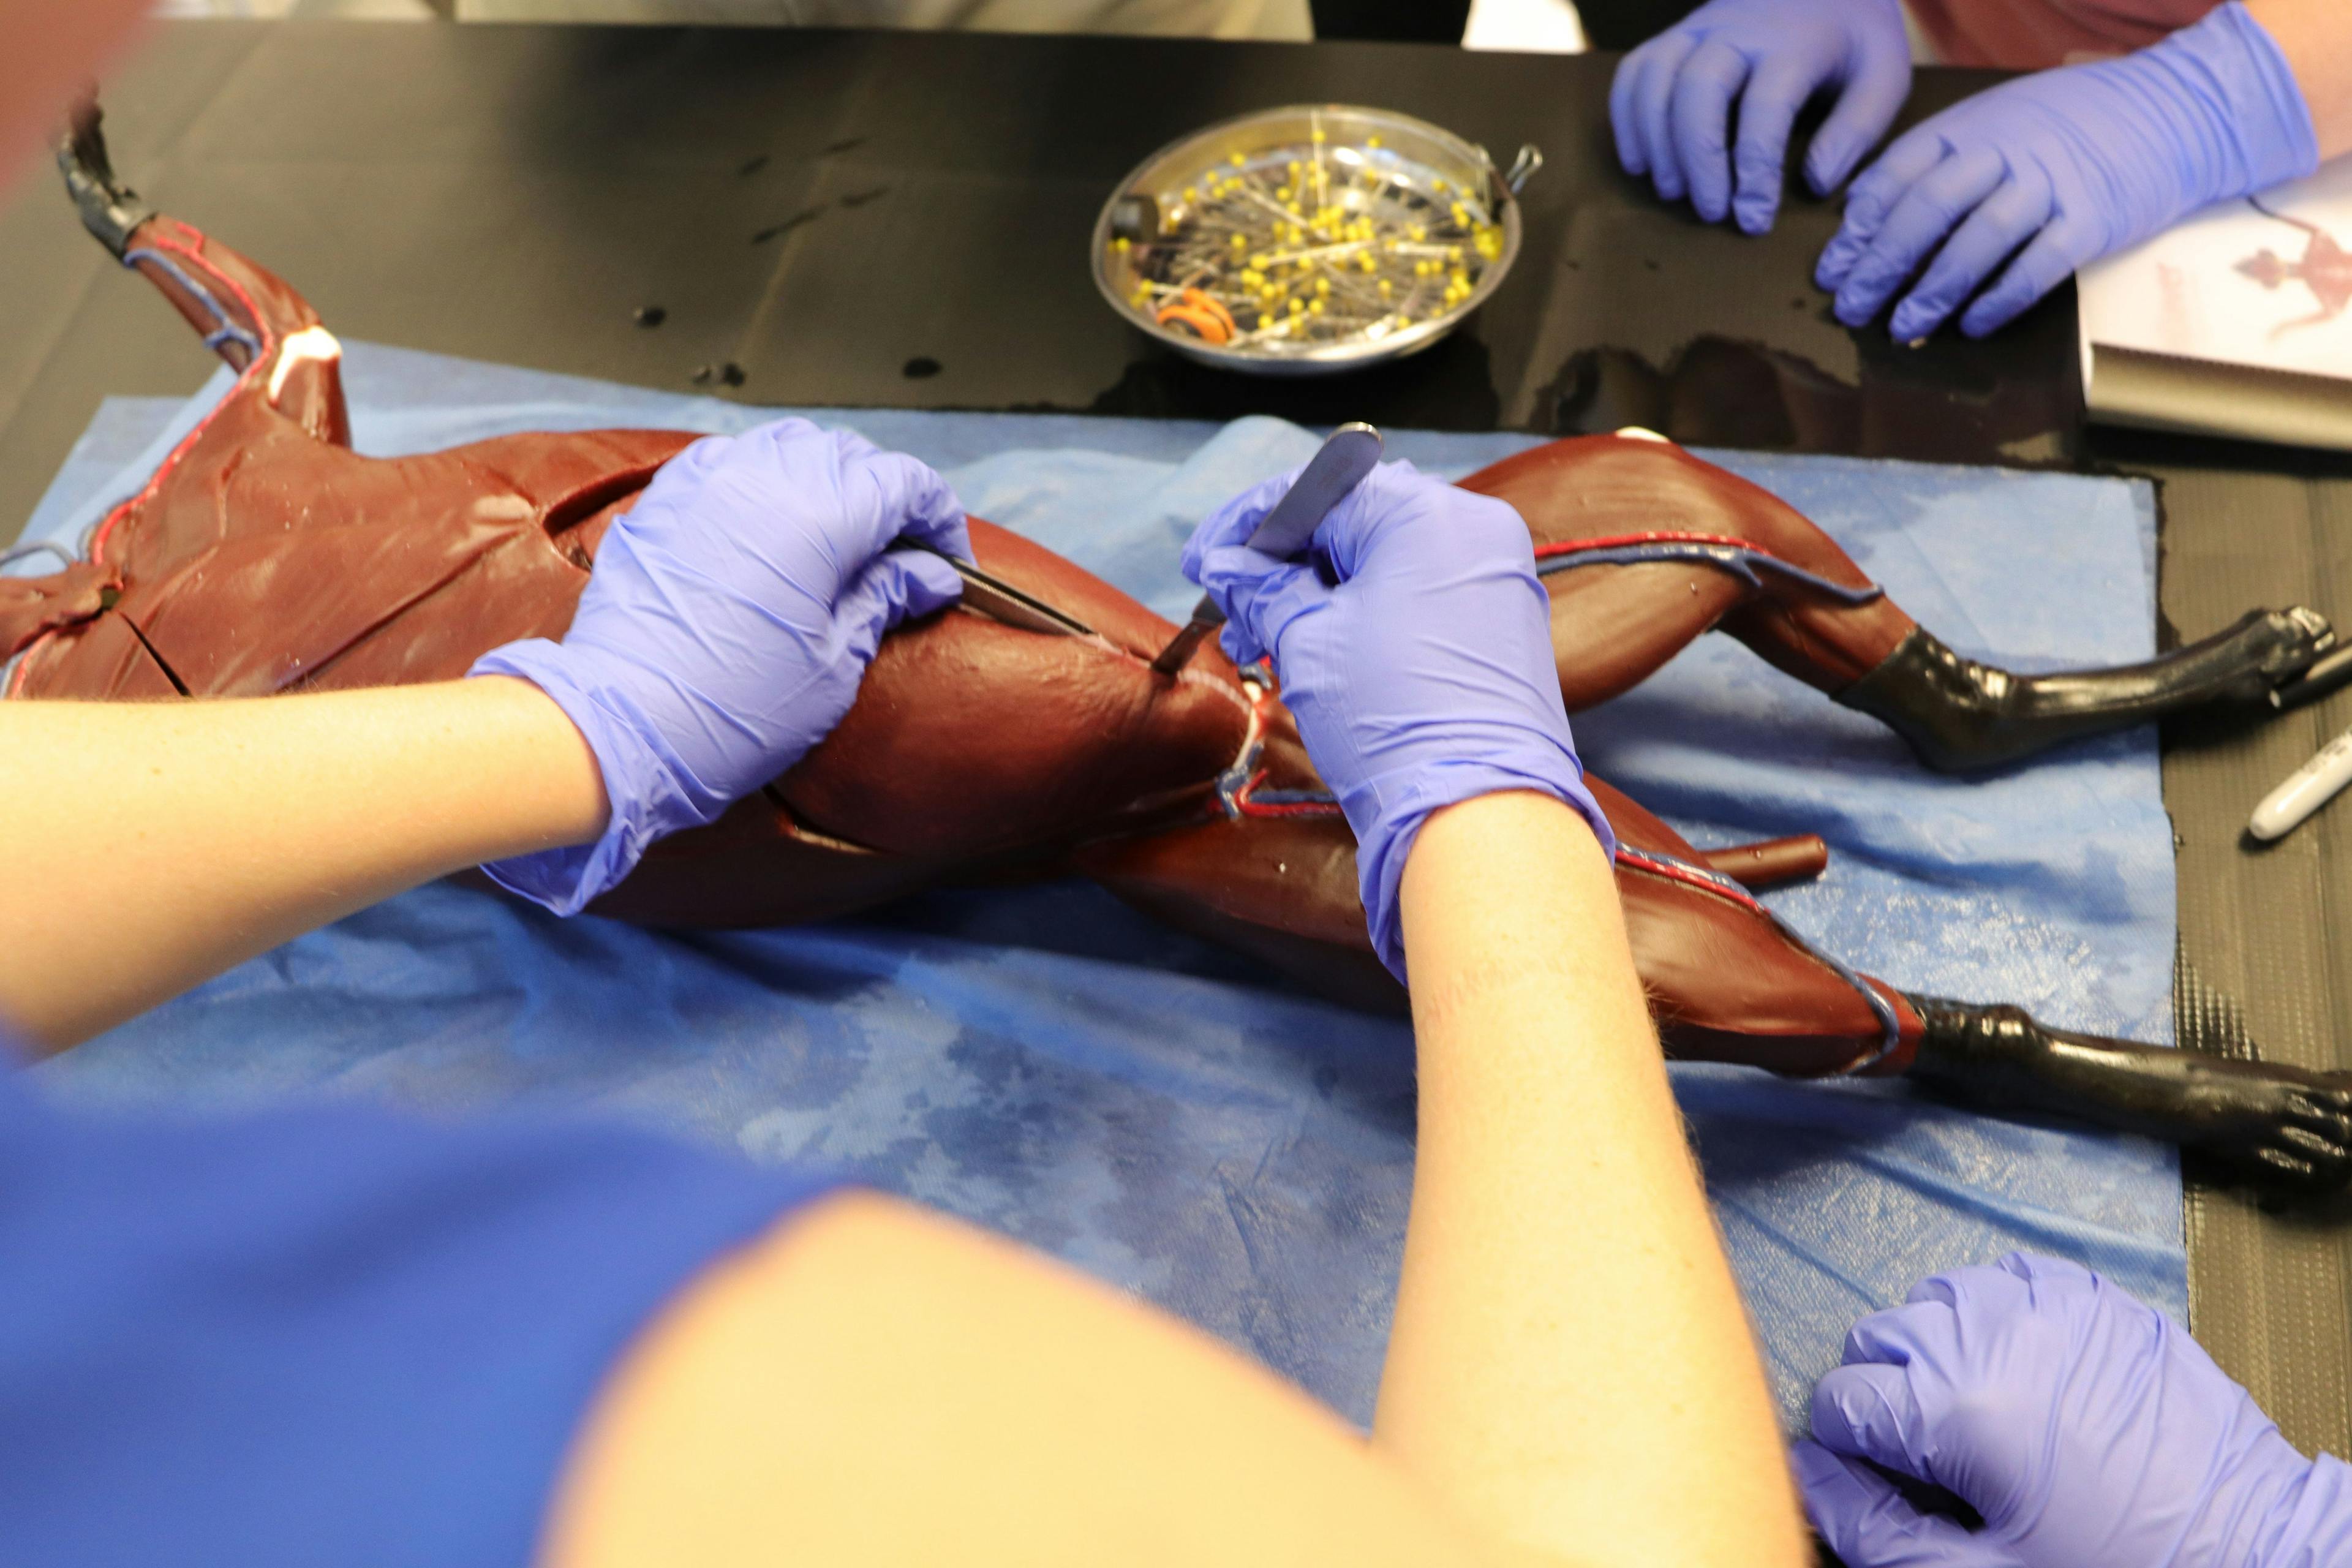 Veterinary students using SynDaver's new synthetic feline surgical training model. (Photo courtesy of SynDaver)